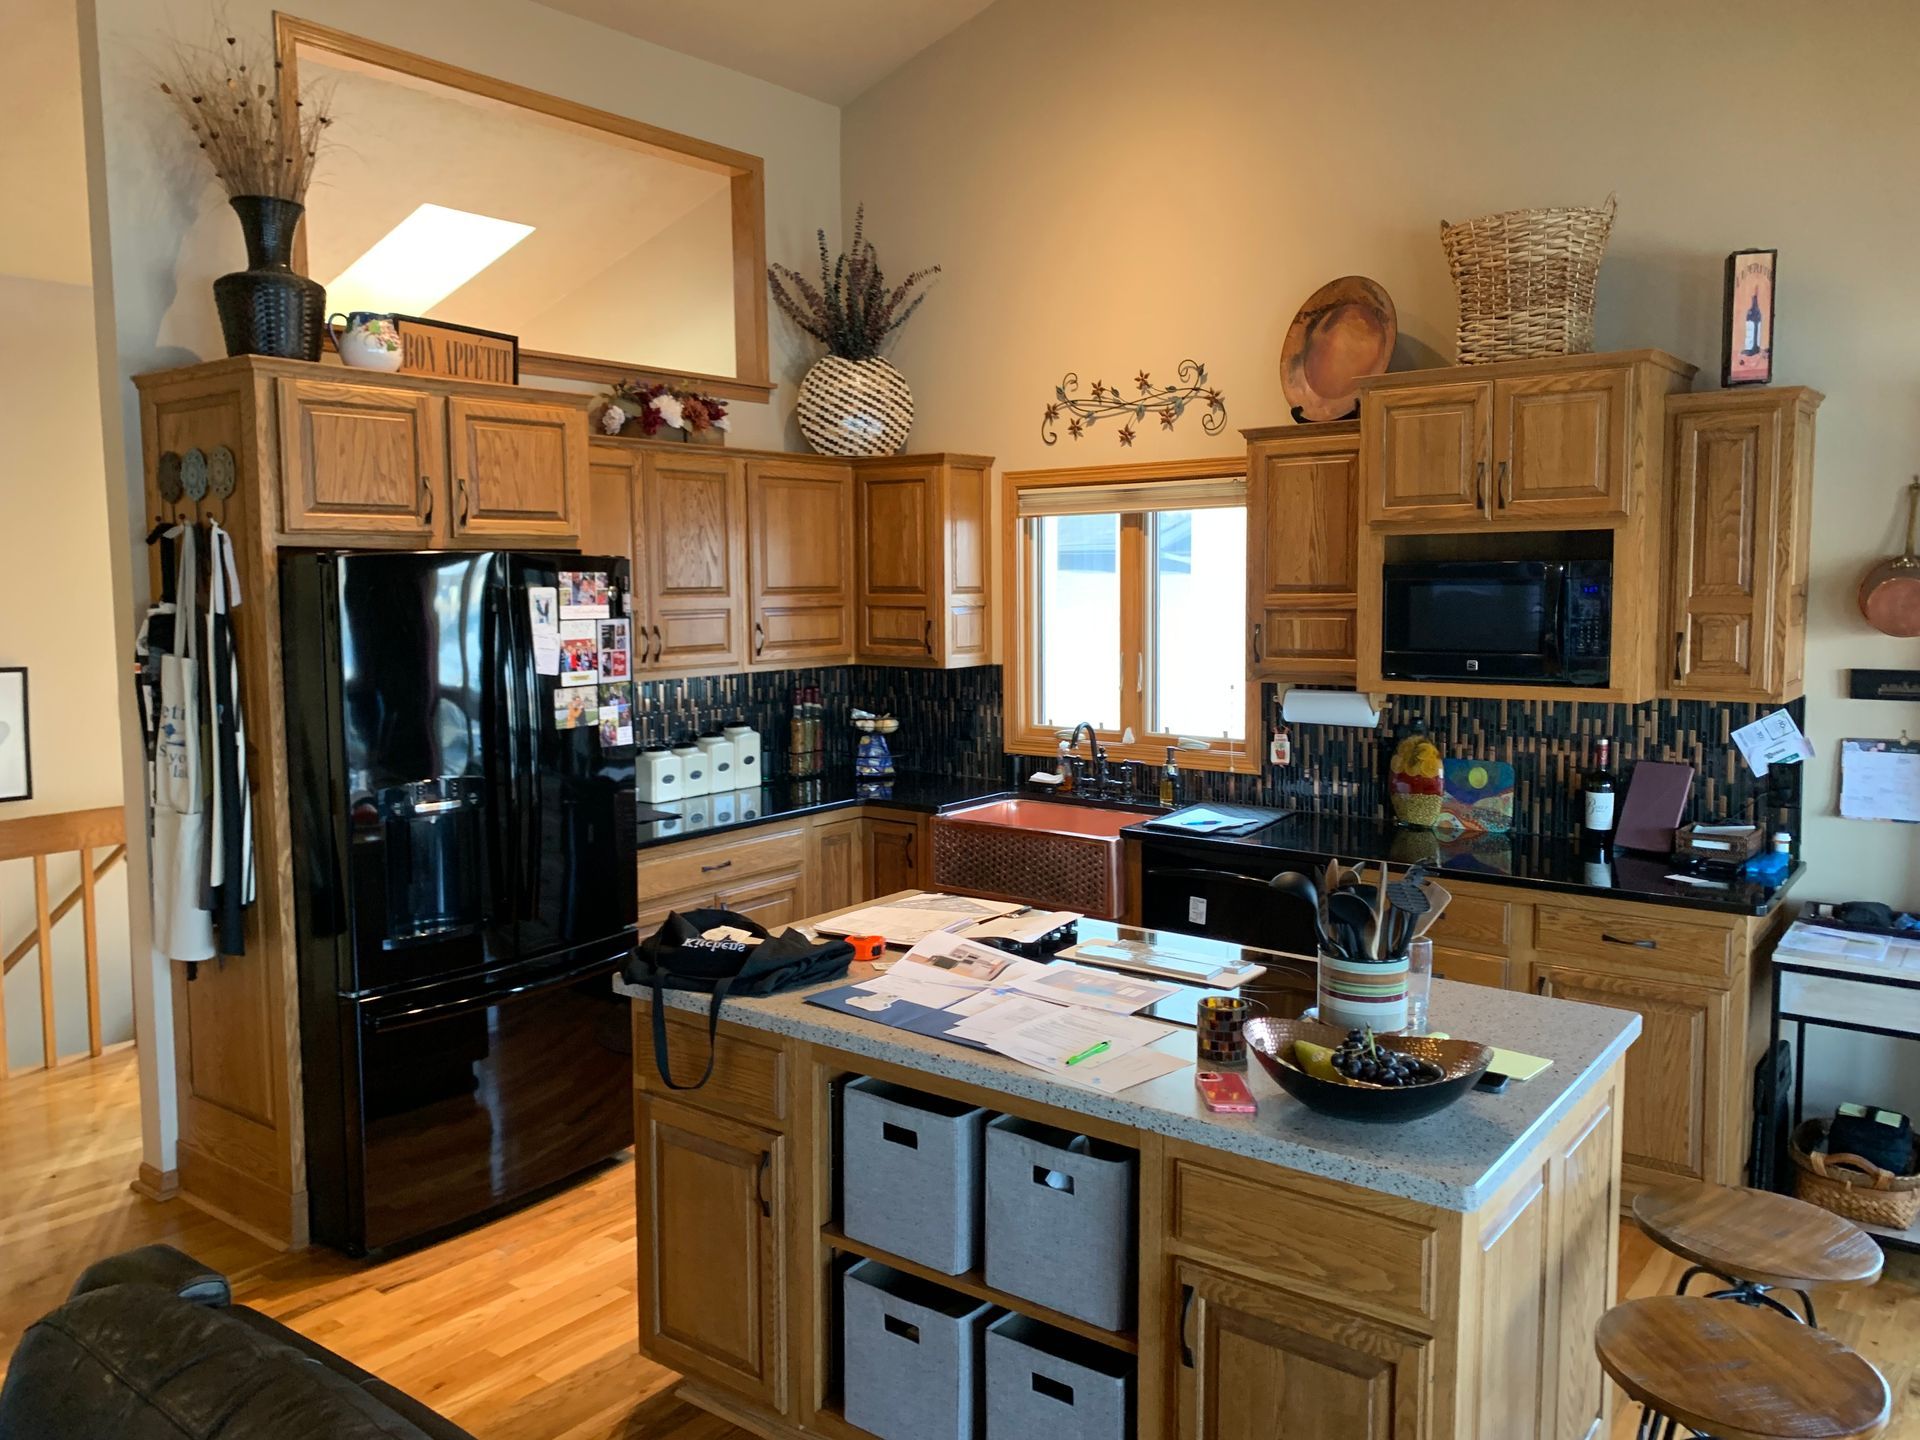 Kitchen with wooden cabinets and a black refrigerator